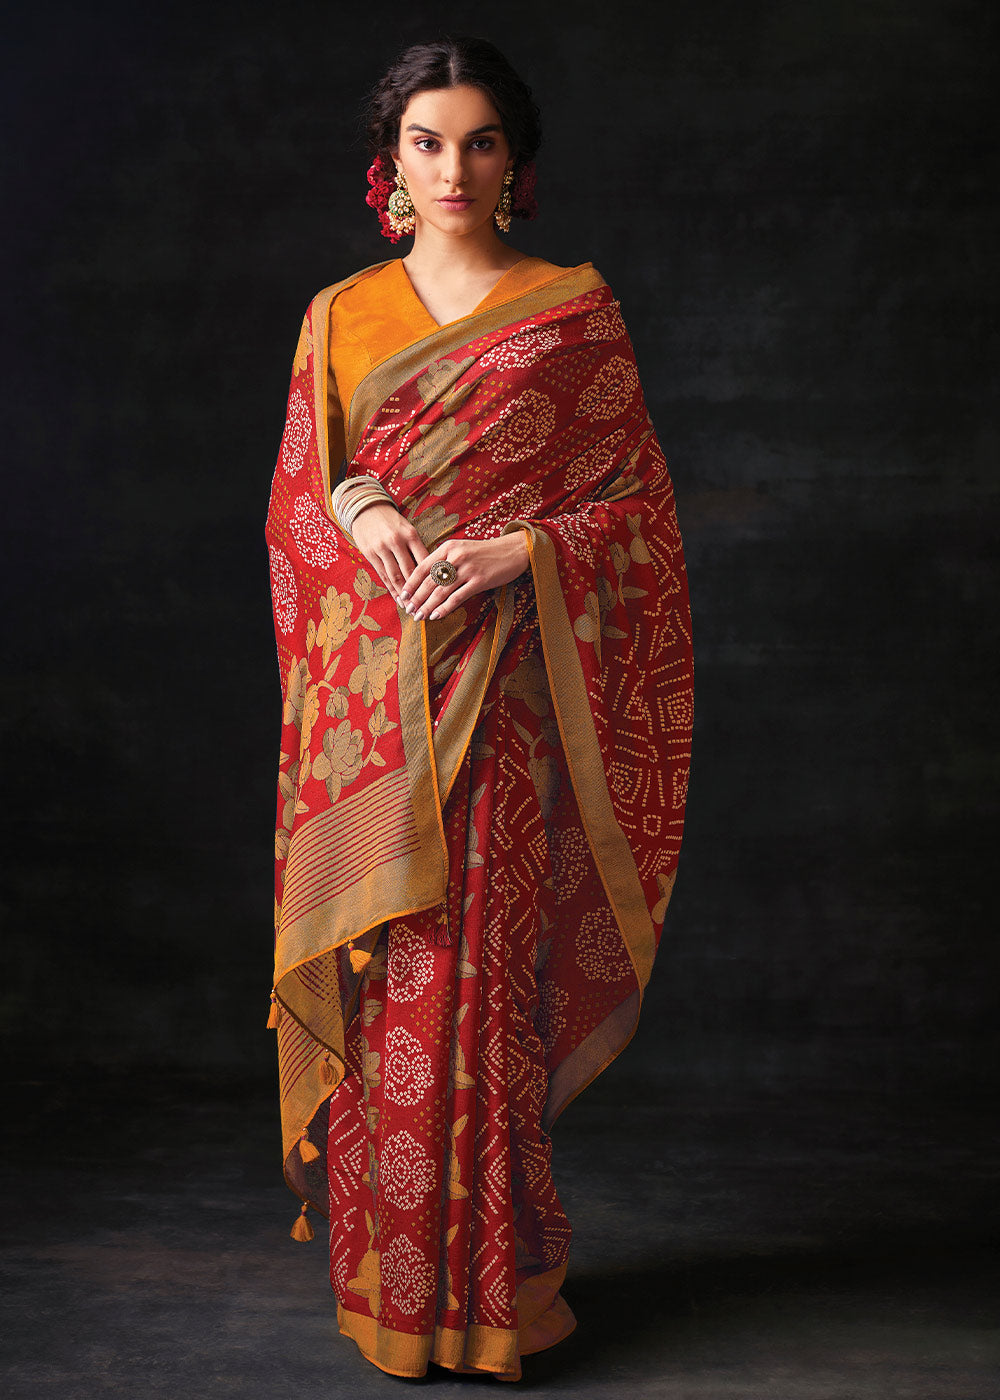 Edathal Star Collection's Attractive Georgette Chiffon Thread & Sequin Work  In Saree With Gold Zari Weaving Border With Stylish Latkan In Pallu | Soft Georgette  Chiffon Saree